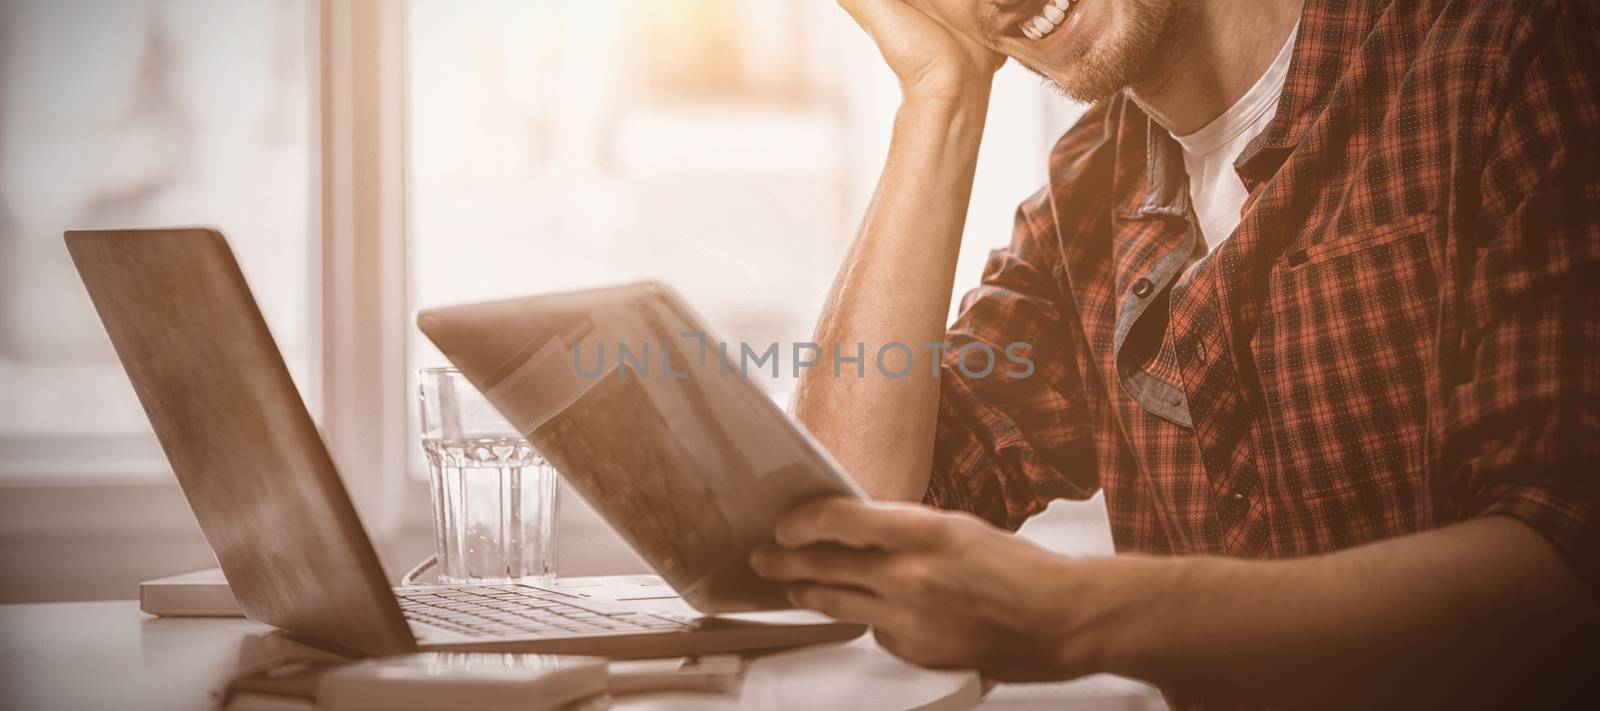 Graphic designer using laptop and digital tablet at his desk by Wavebreakmedia